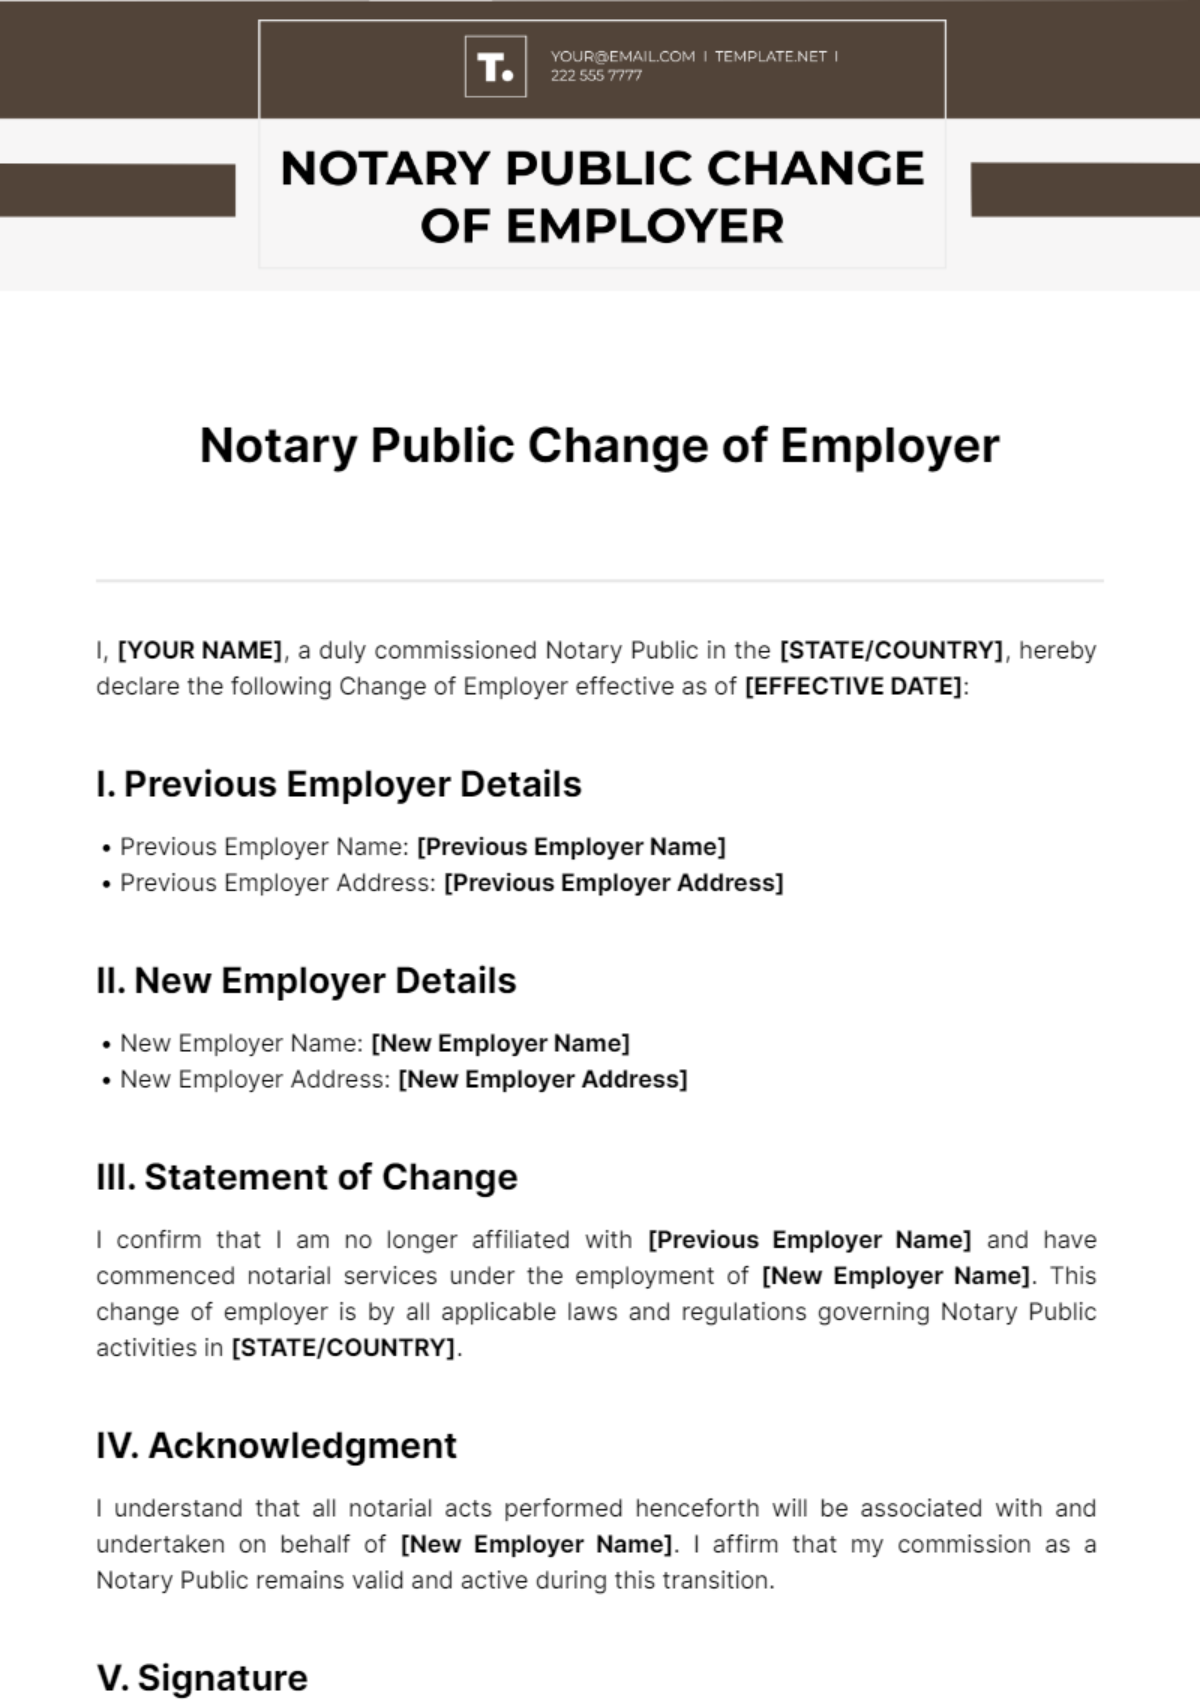 Free Notary Public Change Of Employer Template